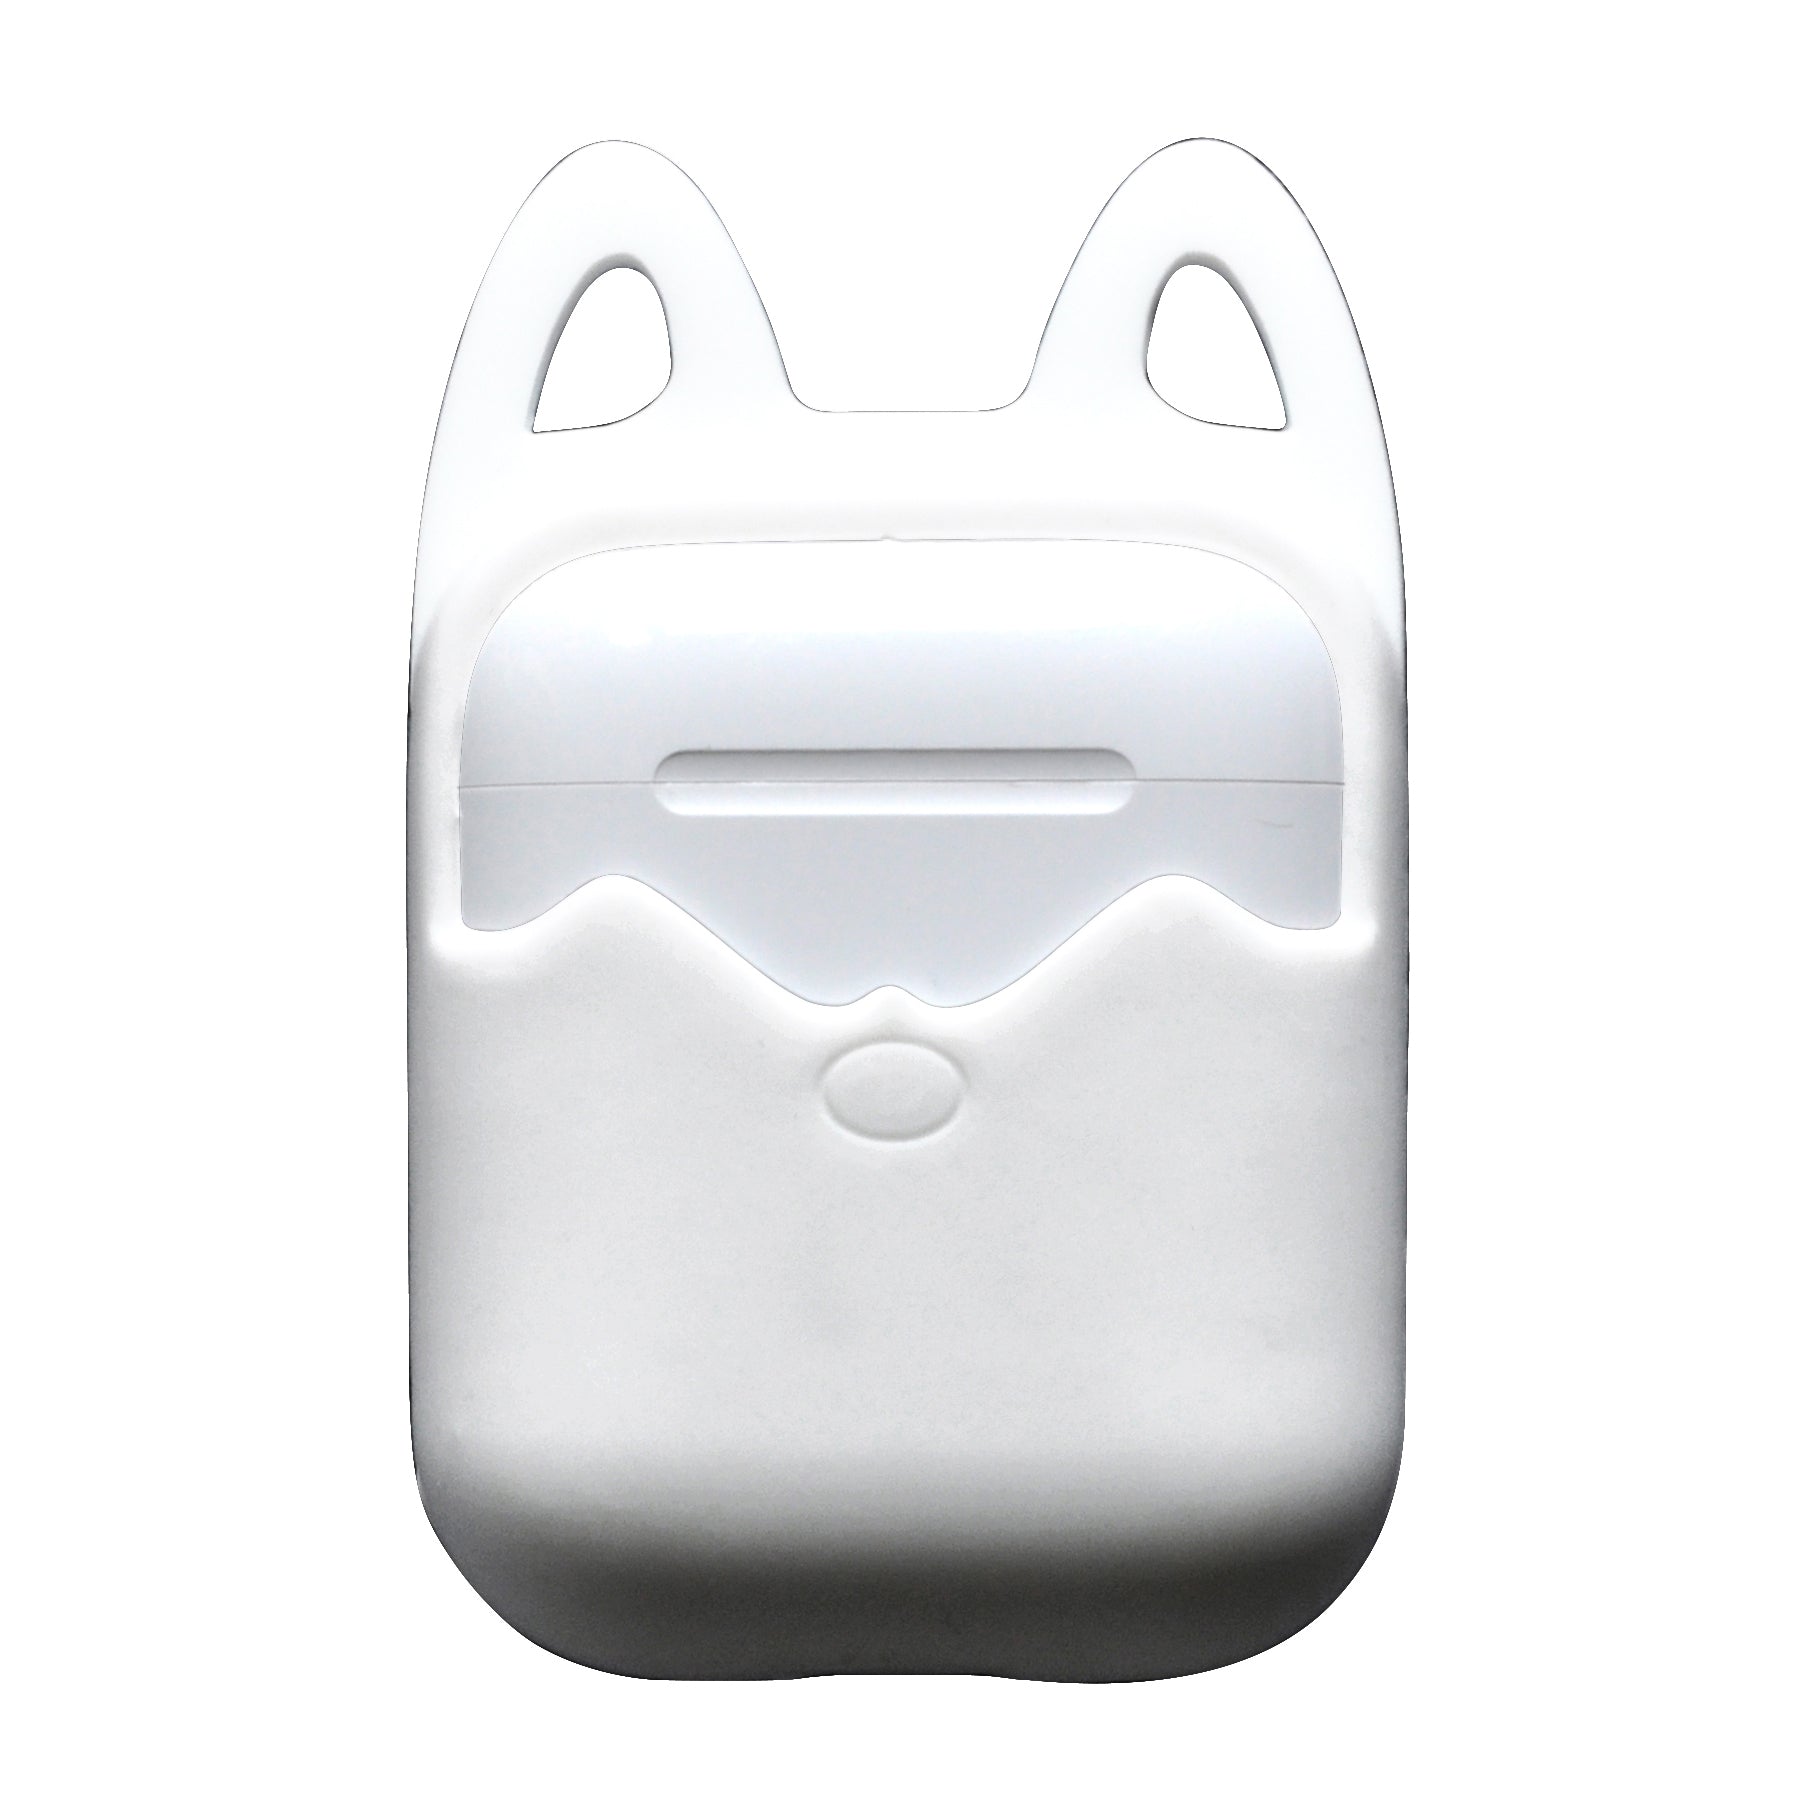  Cat  Shaped Cover AirPod  Skins